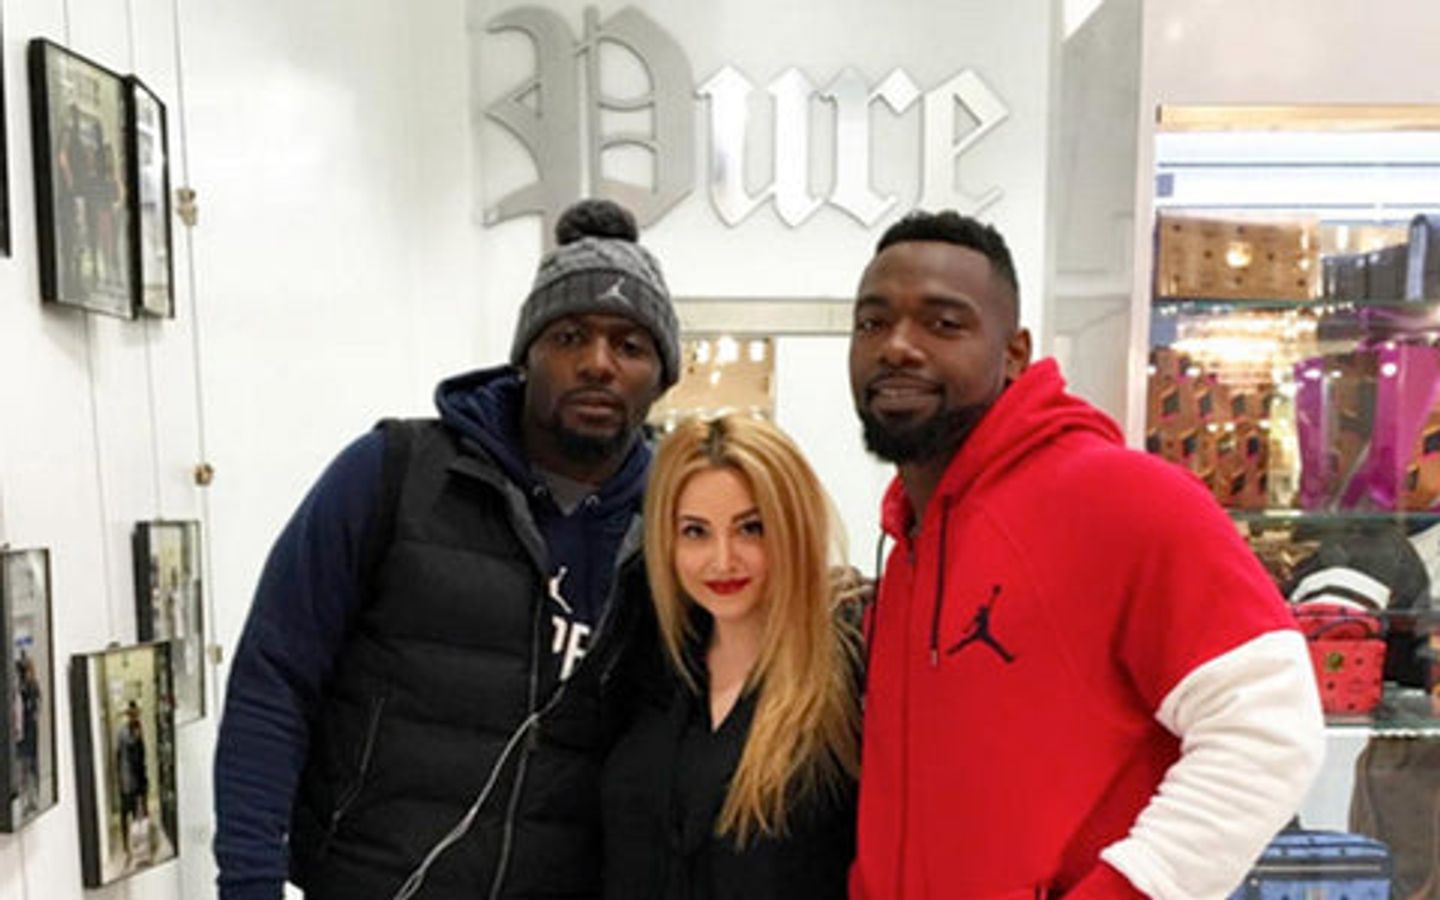 Dallas Cowboys Dez Bryant and Orie Lemon of Tampa Bay, Styled by Lizzie Pure at Pure Houston, Houston Galleria Mall